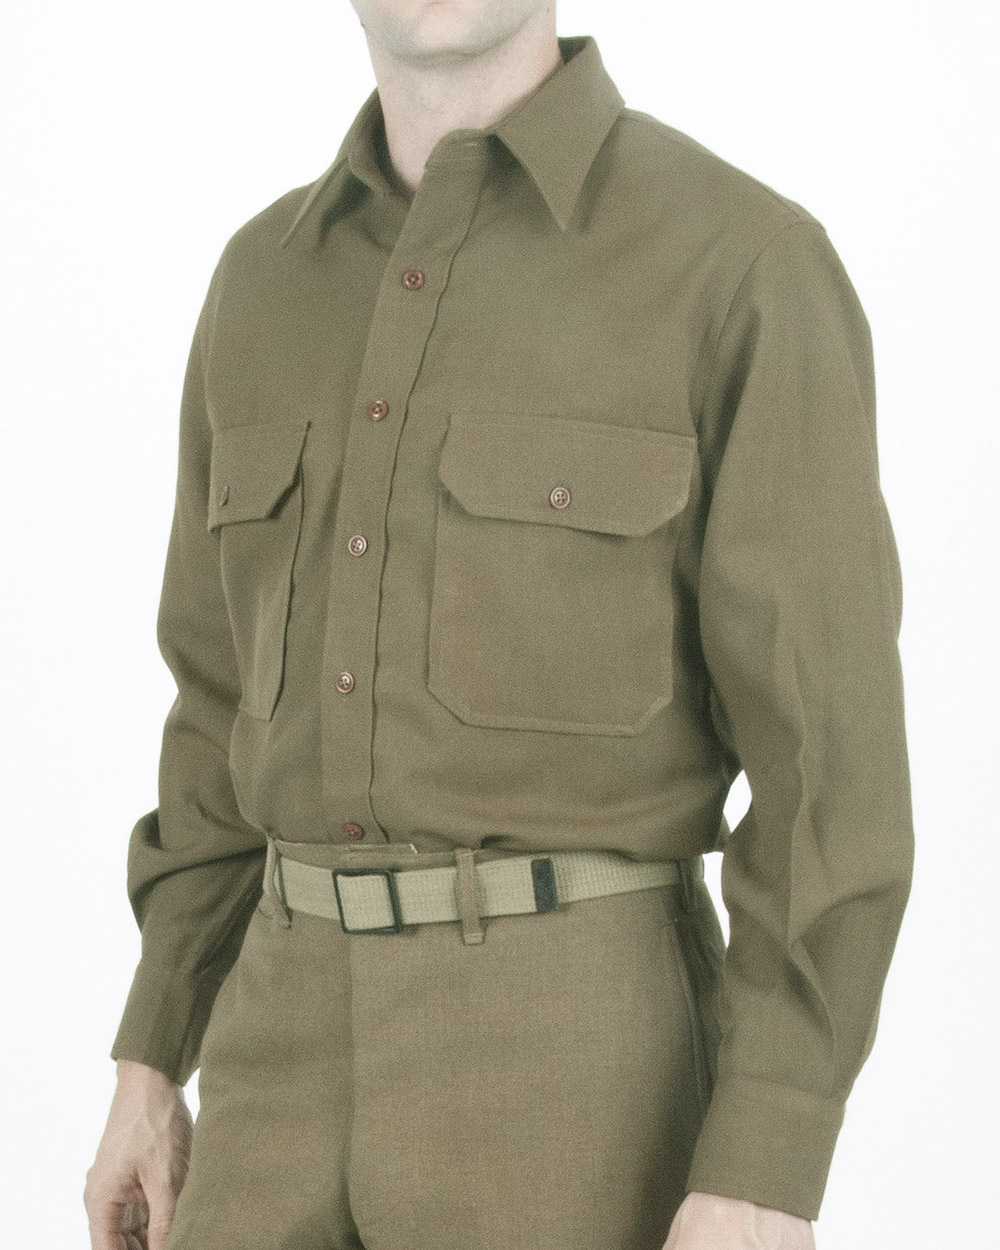 US Army WWII M37 Wool Shirt